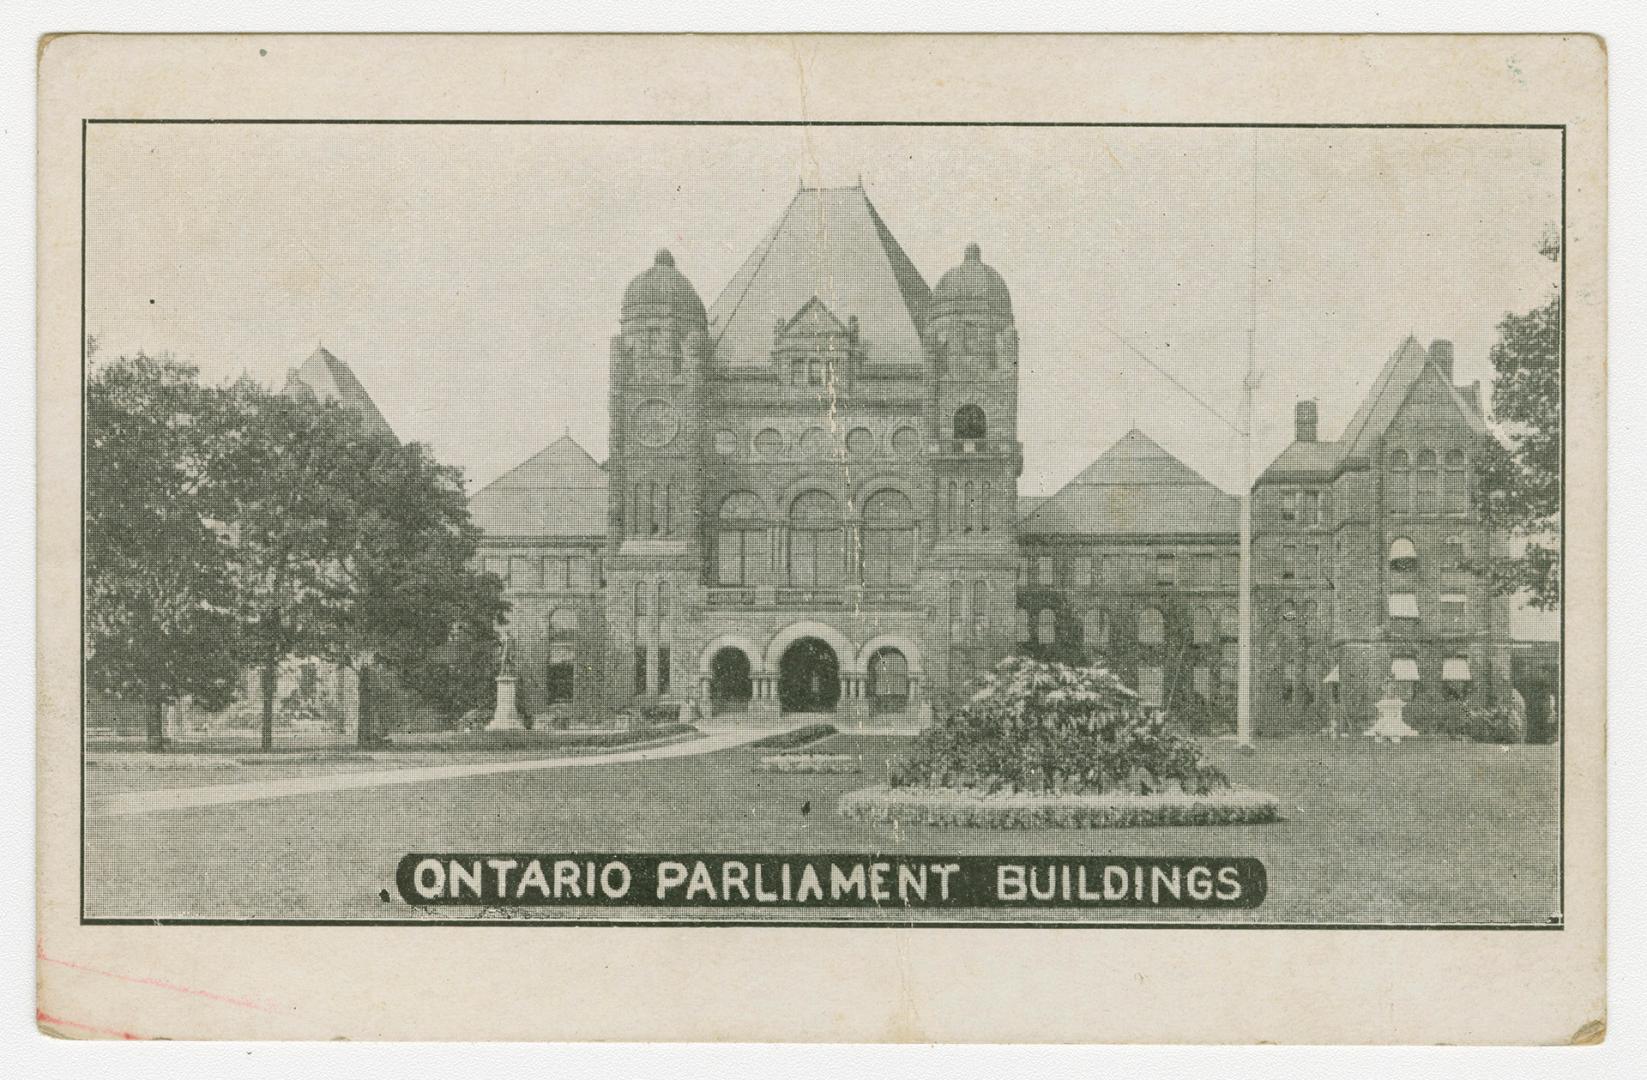 Black and white photograph of a large government building in the Ricardsonian Romanesque style.